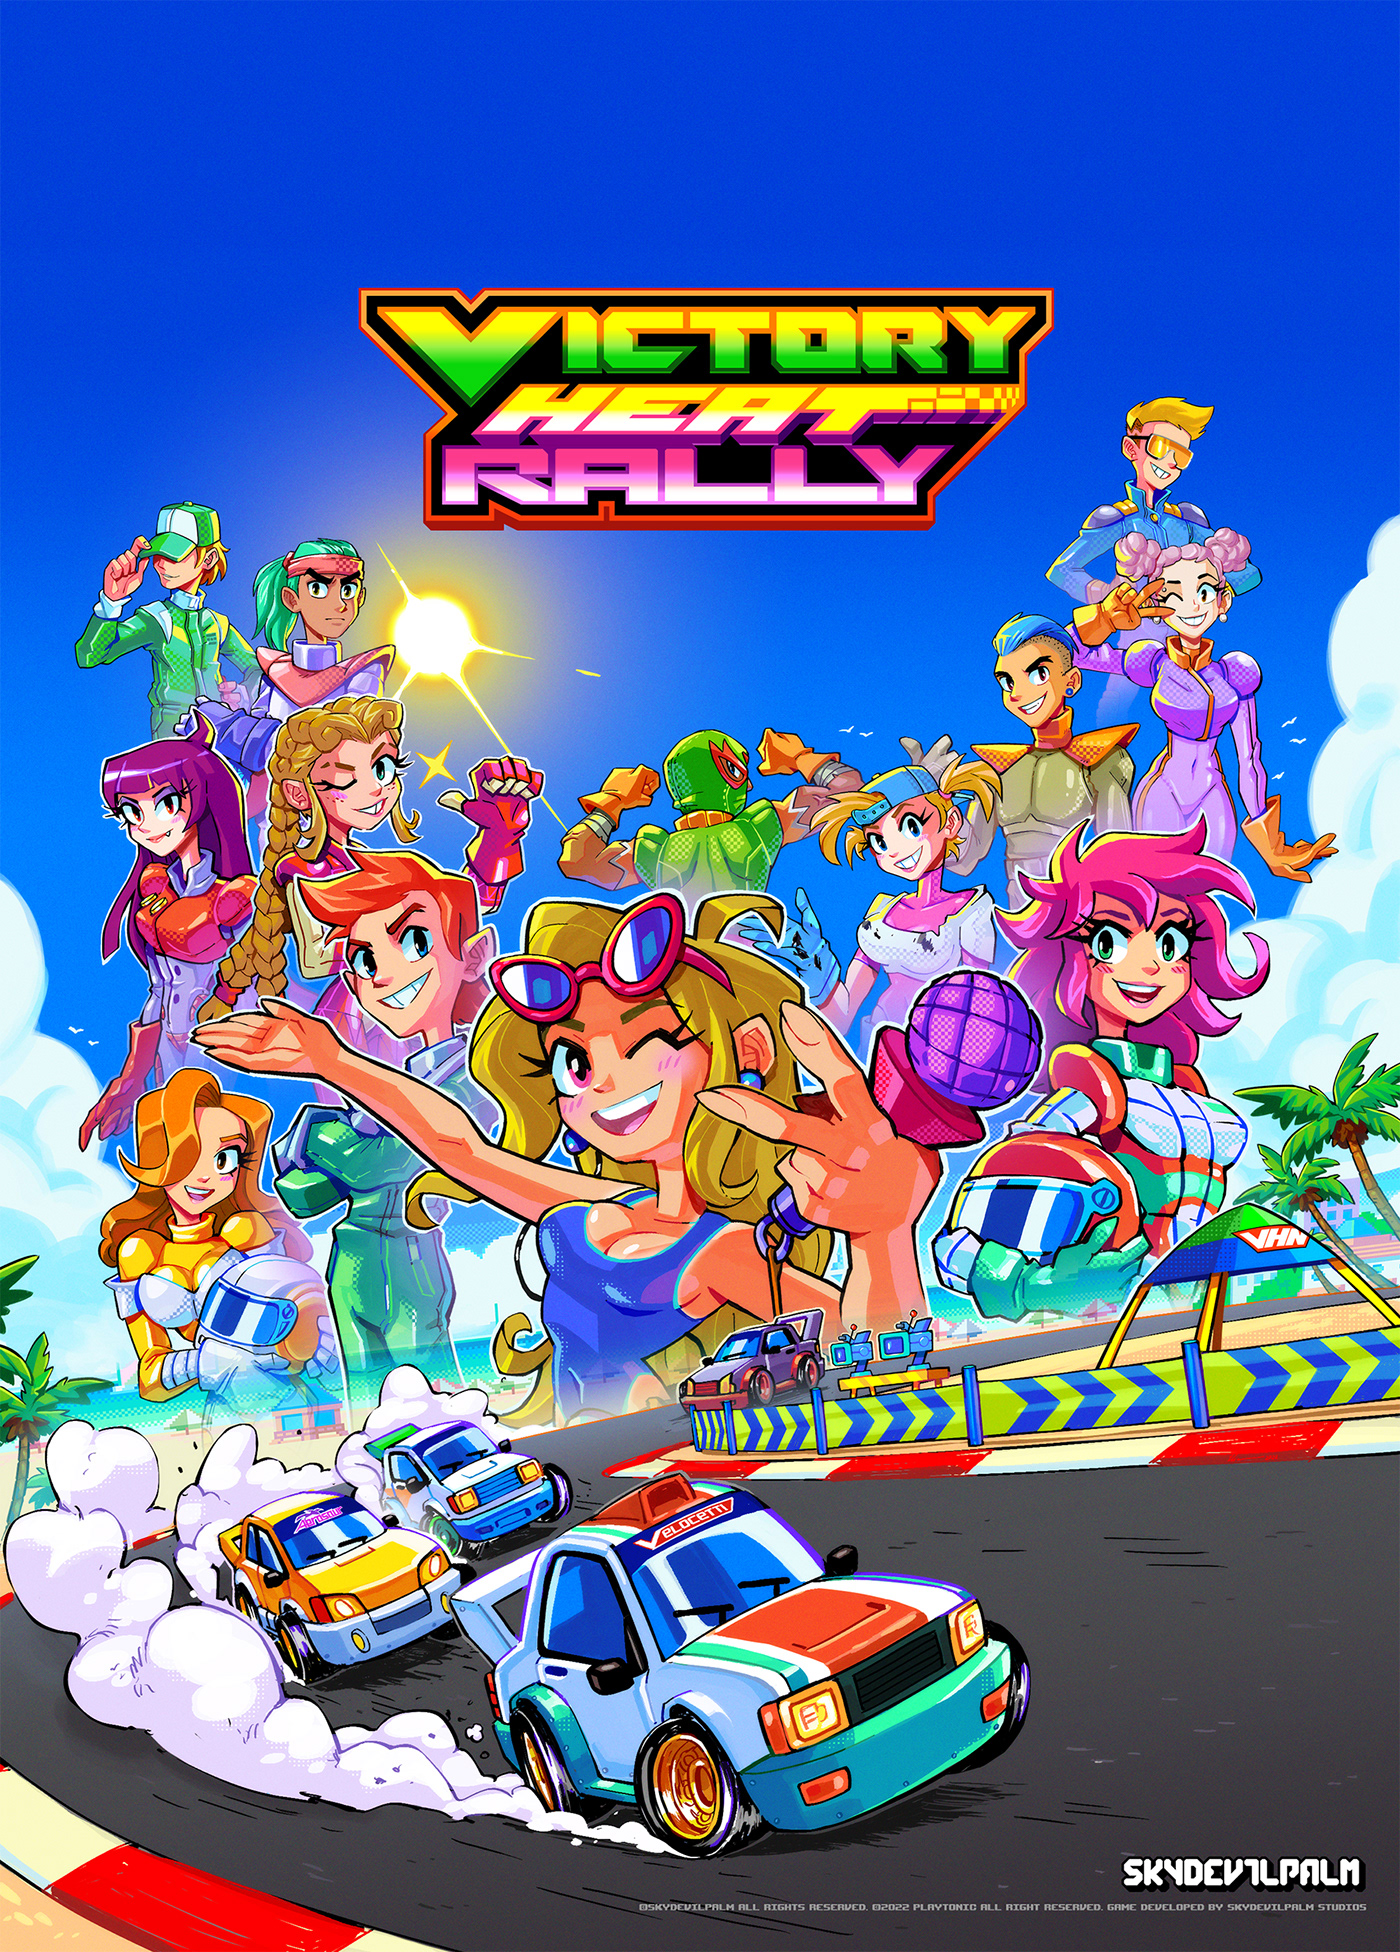 key art steam capsule Cover Art Game Art playtonic victory heat rally Indie game concept art